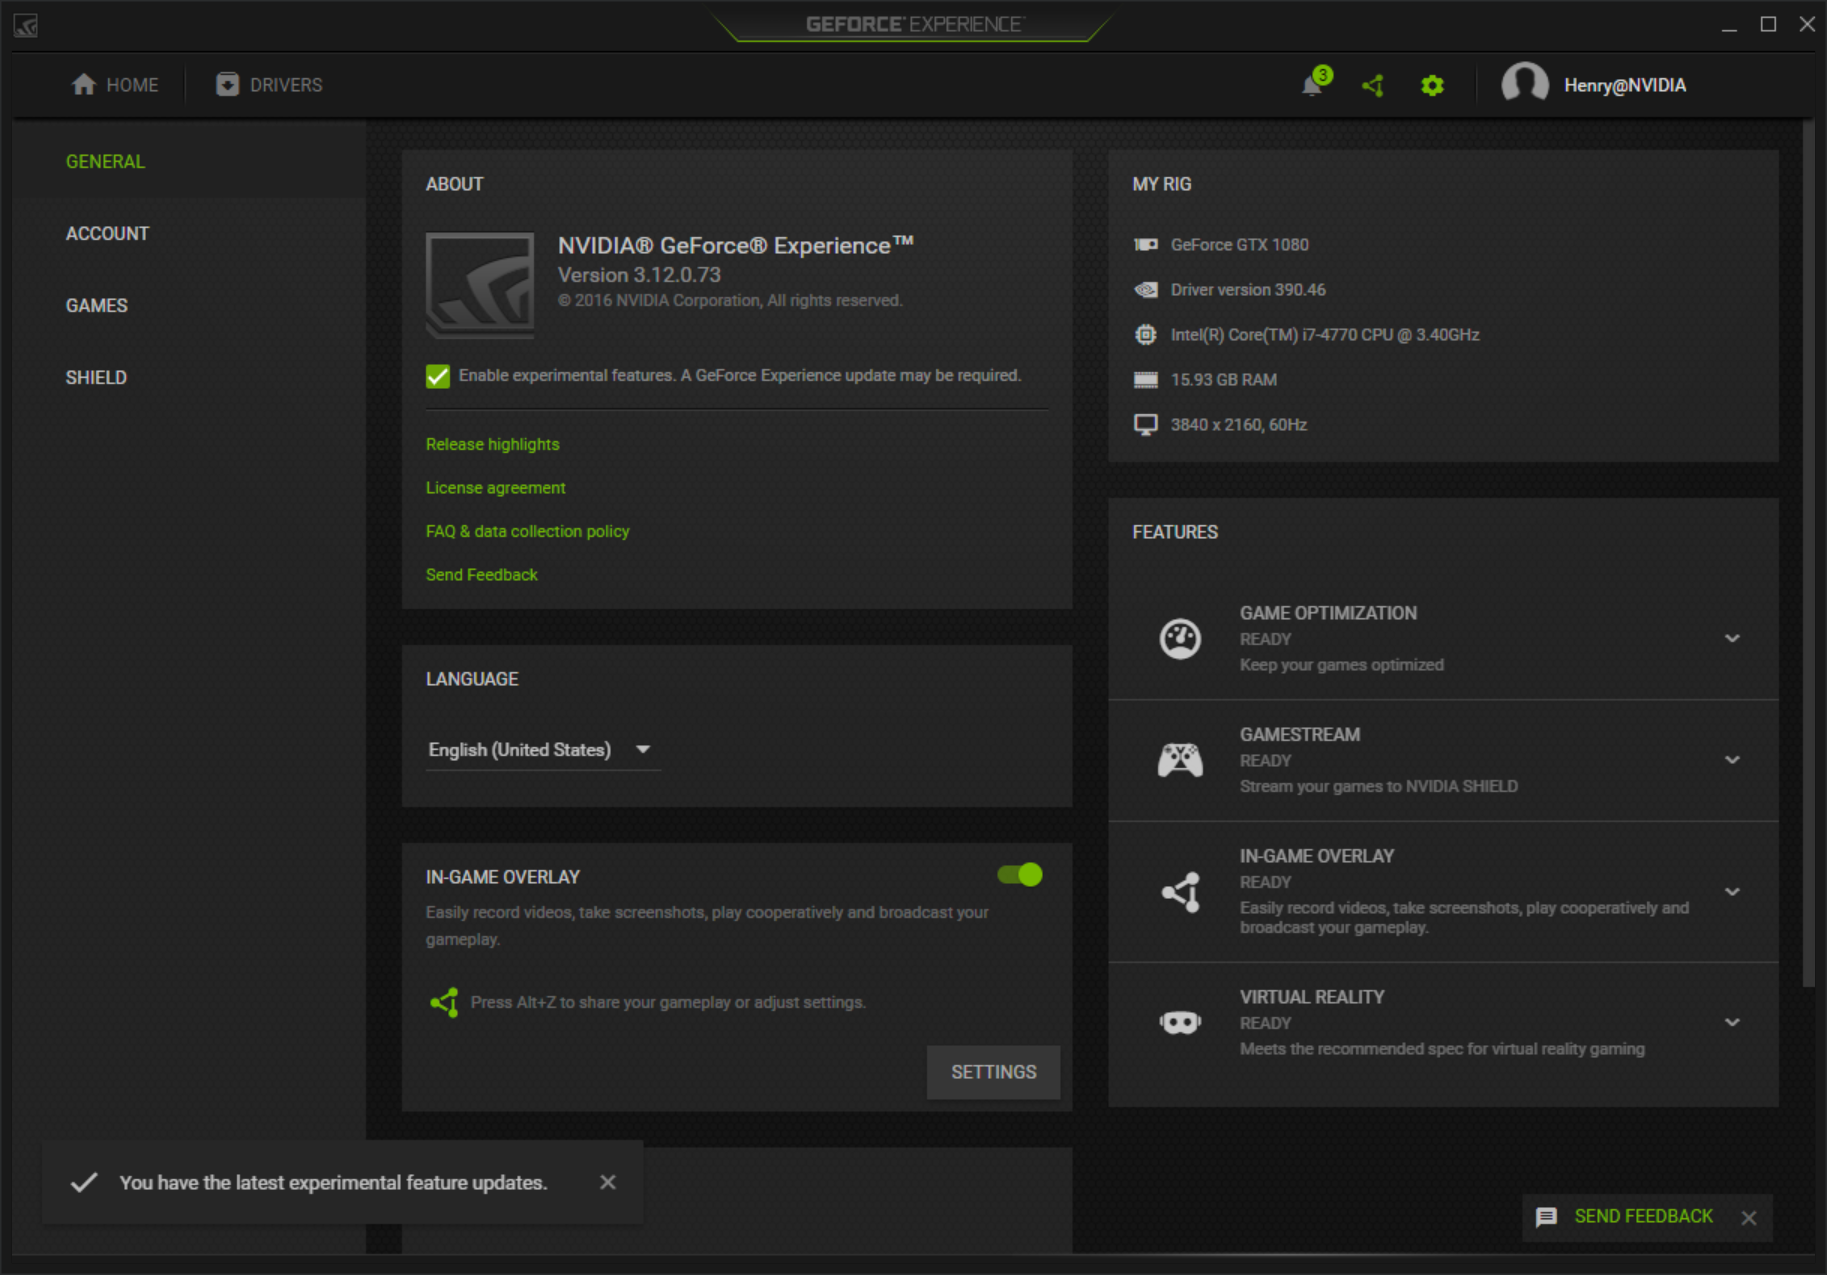 Open GeForce Experience
Click on the Drivers tab